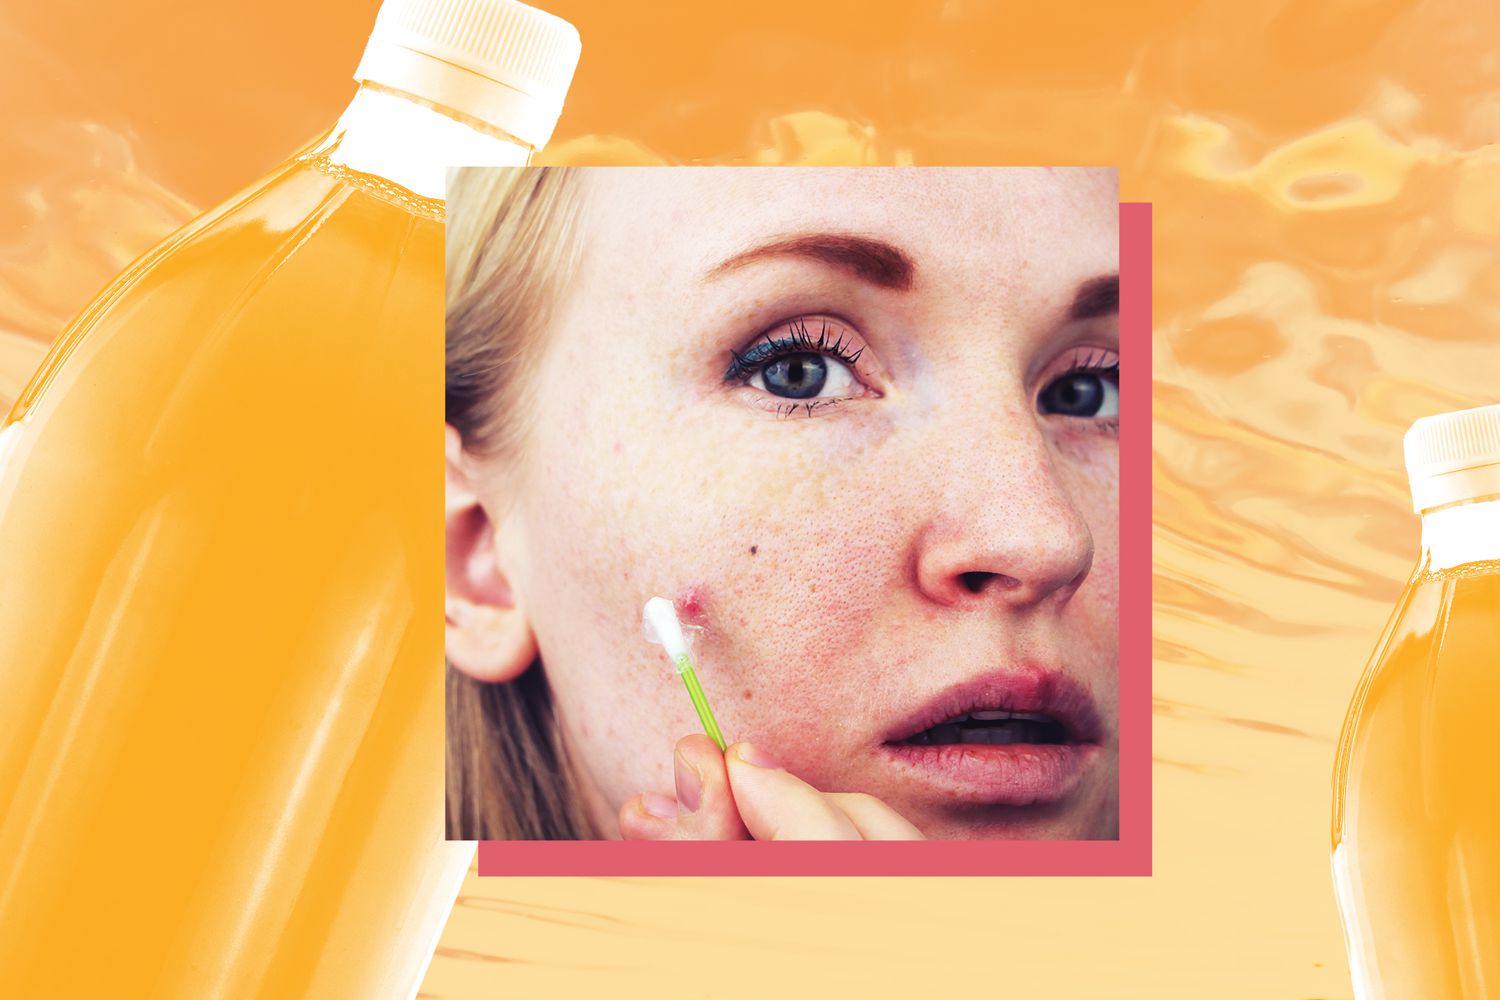 Can Using Apple Cider Vinegar for Acne Actually Prevent Zits? - Young woman with acne. Applying apple cider vinegar to the pimple. Beauty, skin care lifestyle concept.